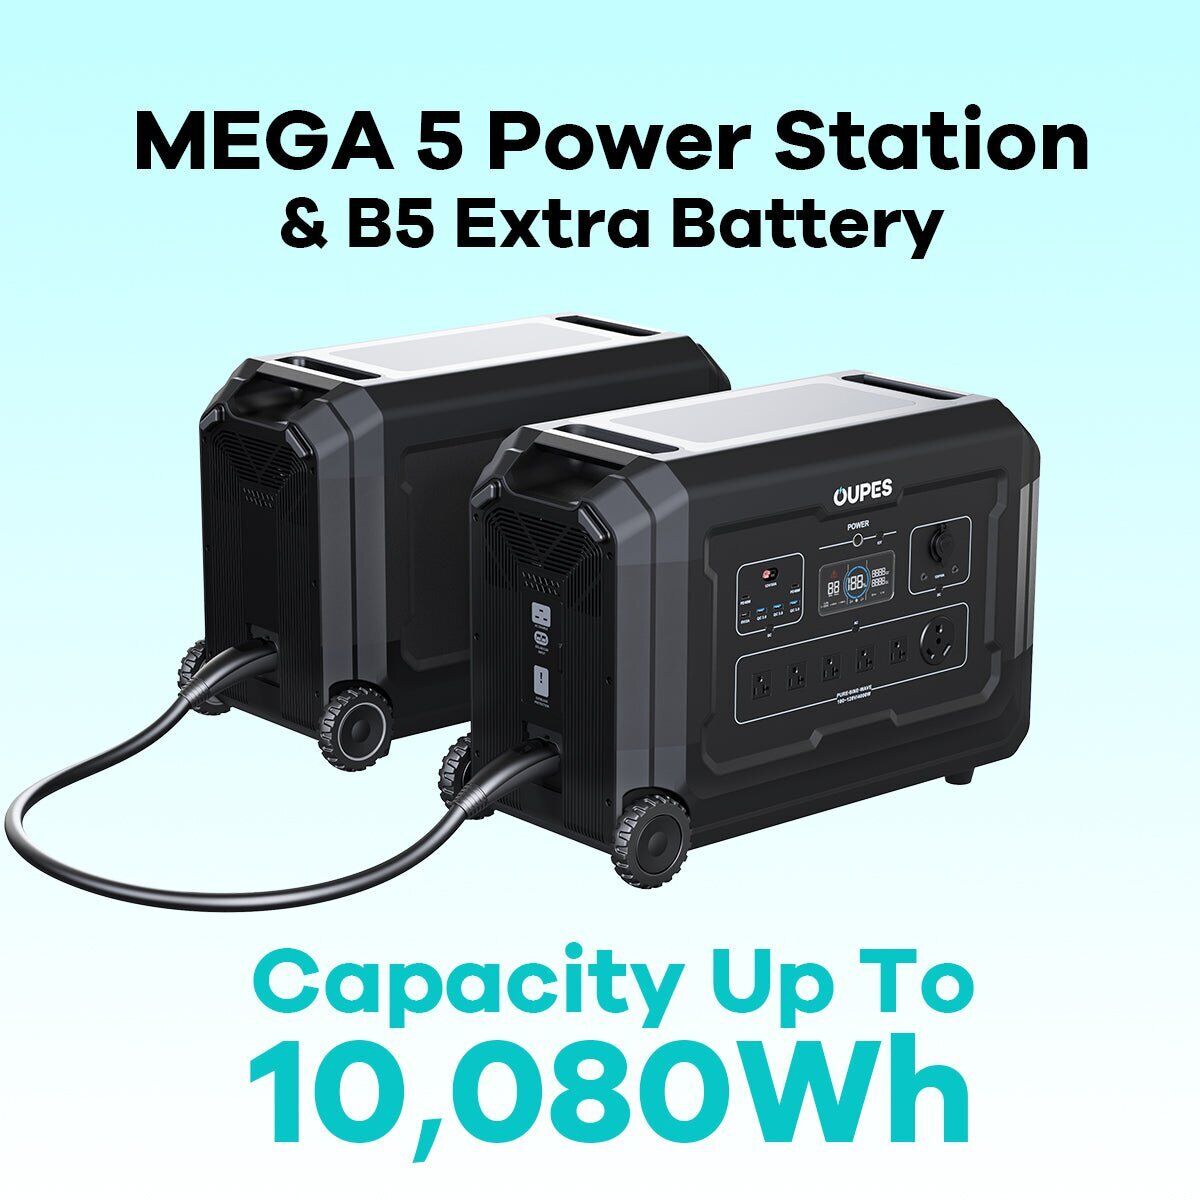 OUPES 4000W Portable Power Station, Mega5 with 5040Wh Extra Battery, 10080Wh Lifepo4 Power Station, Home Battery Backup with Expandable Capacity, Solar Generator for Home Use, Blackout, Camping, RV - image 3 of 20